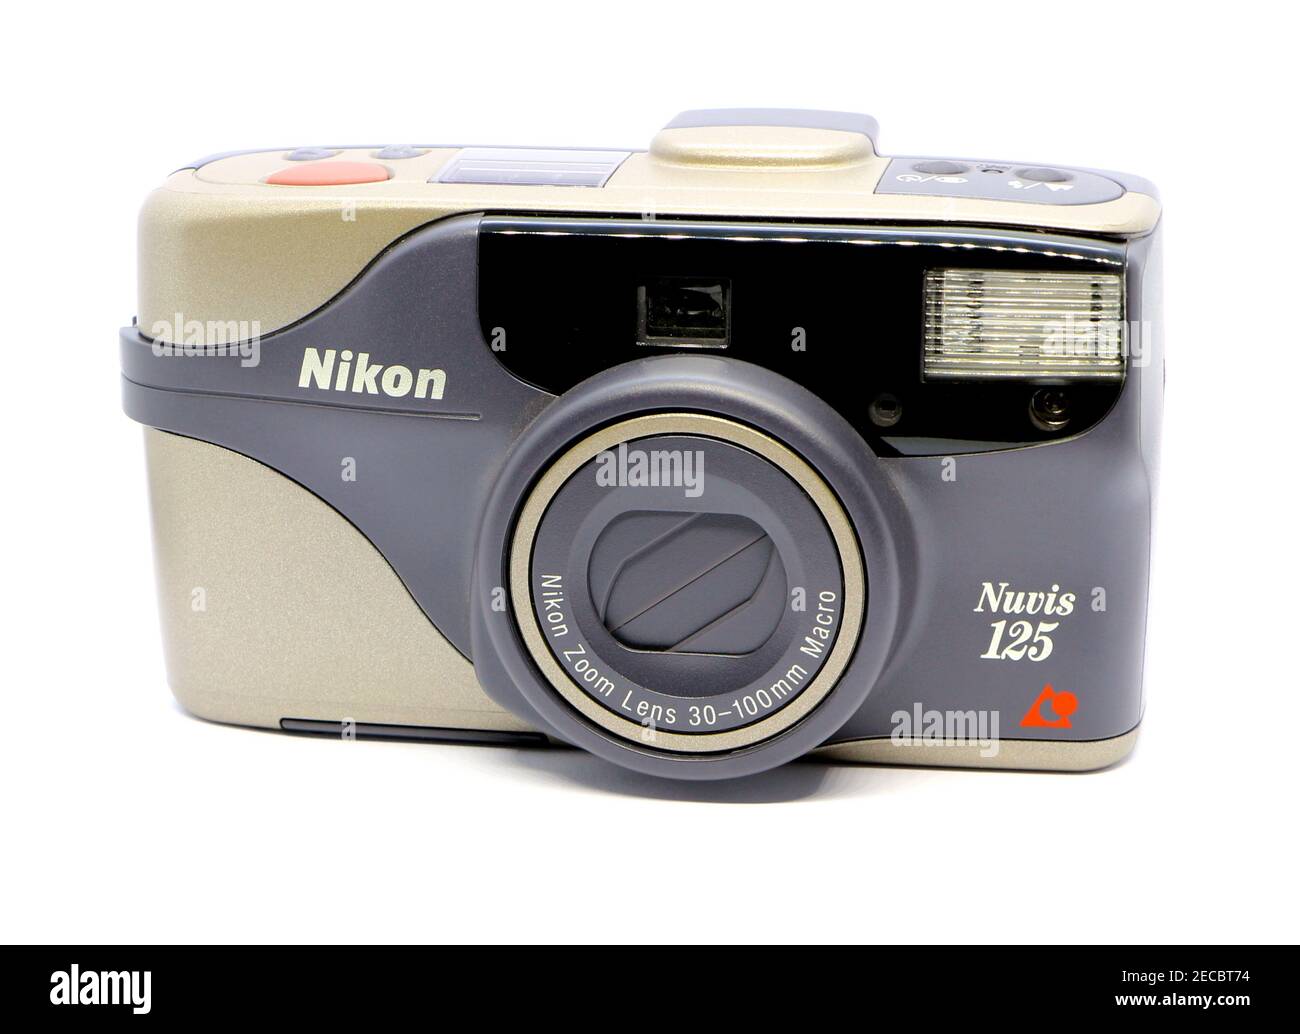 Photo of an Old used 35mm Nikon Nuvis 125 film camera grey and silver with  built in flash with a 30-100 mm zoom lens and macro Stock Photo - Alamy